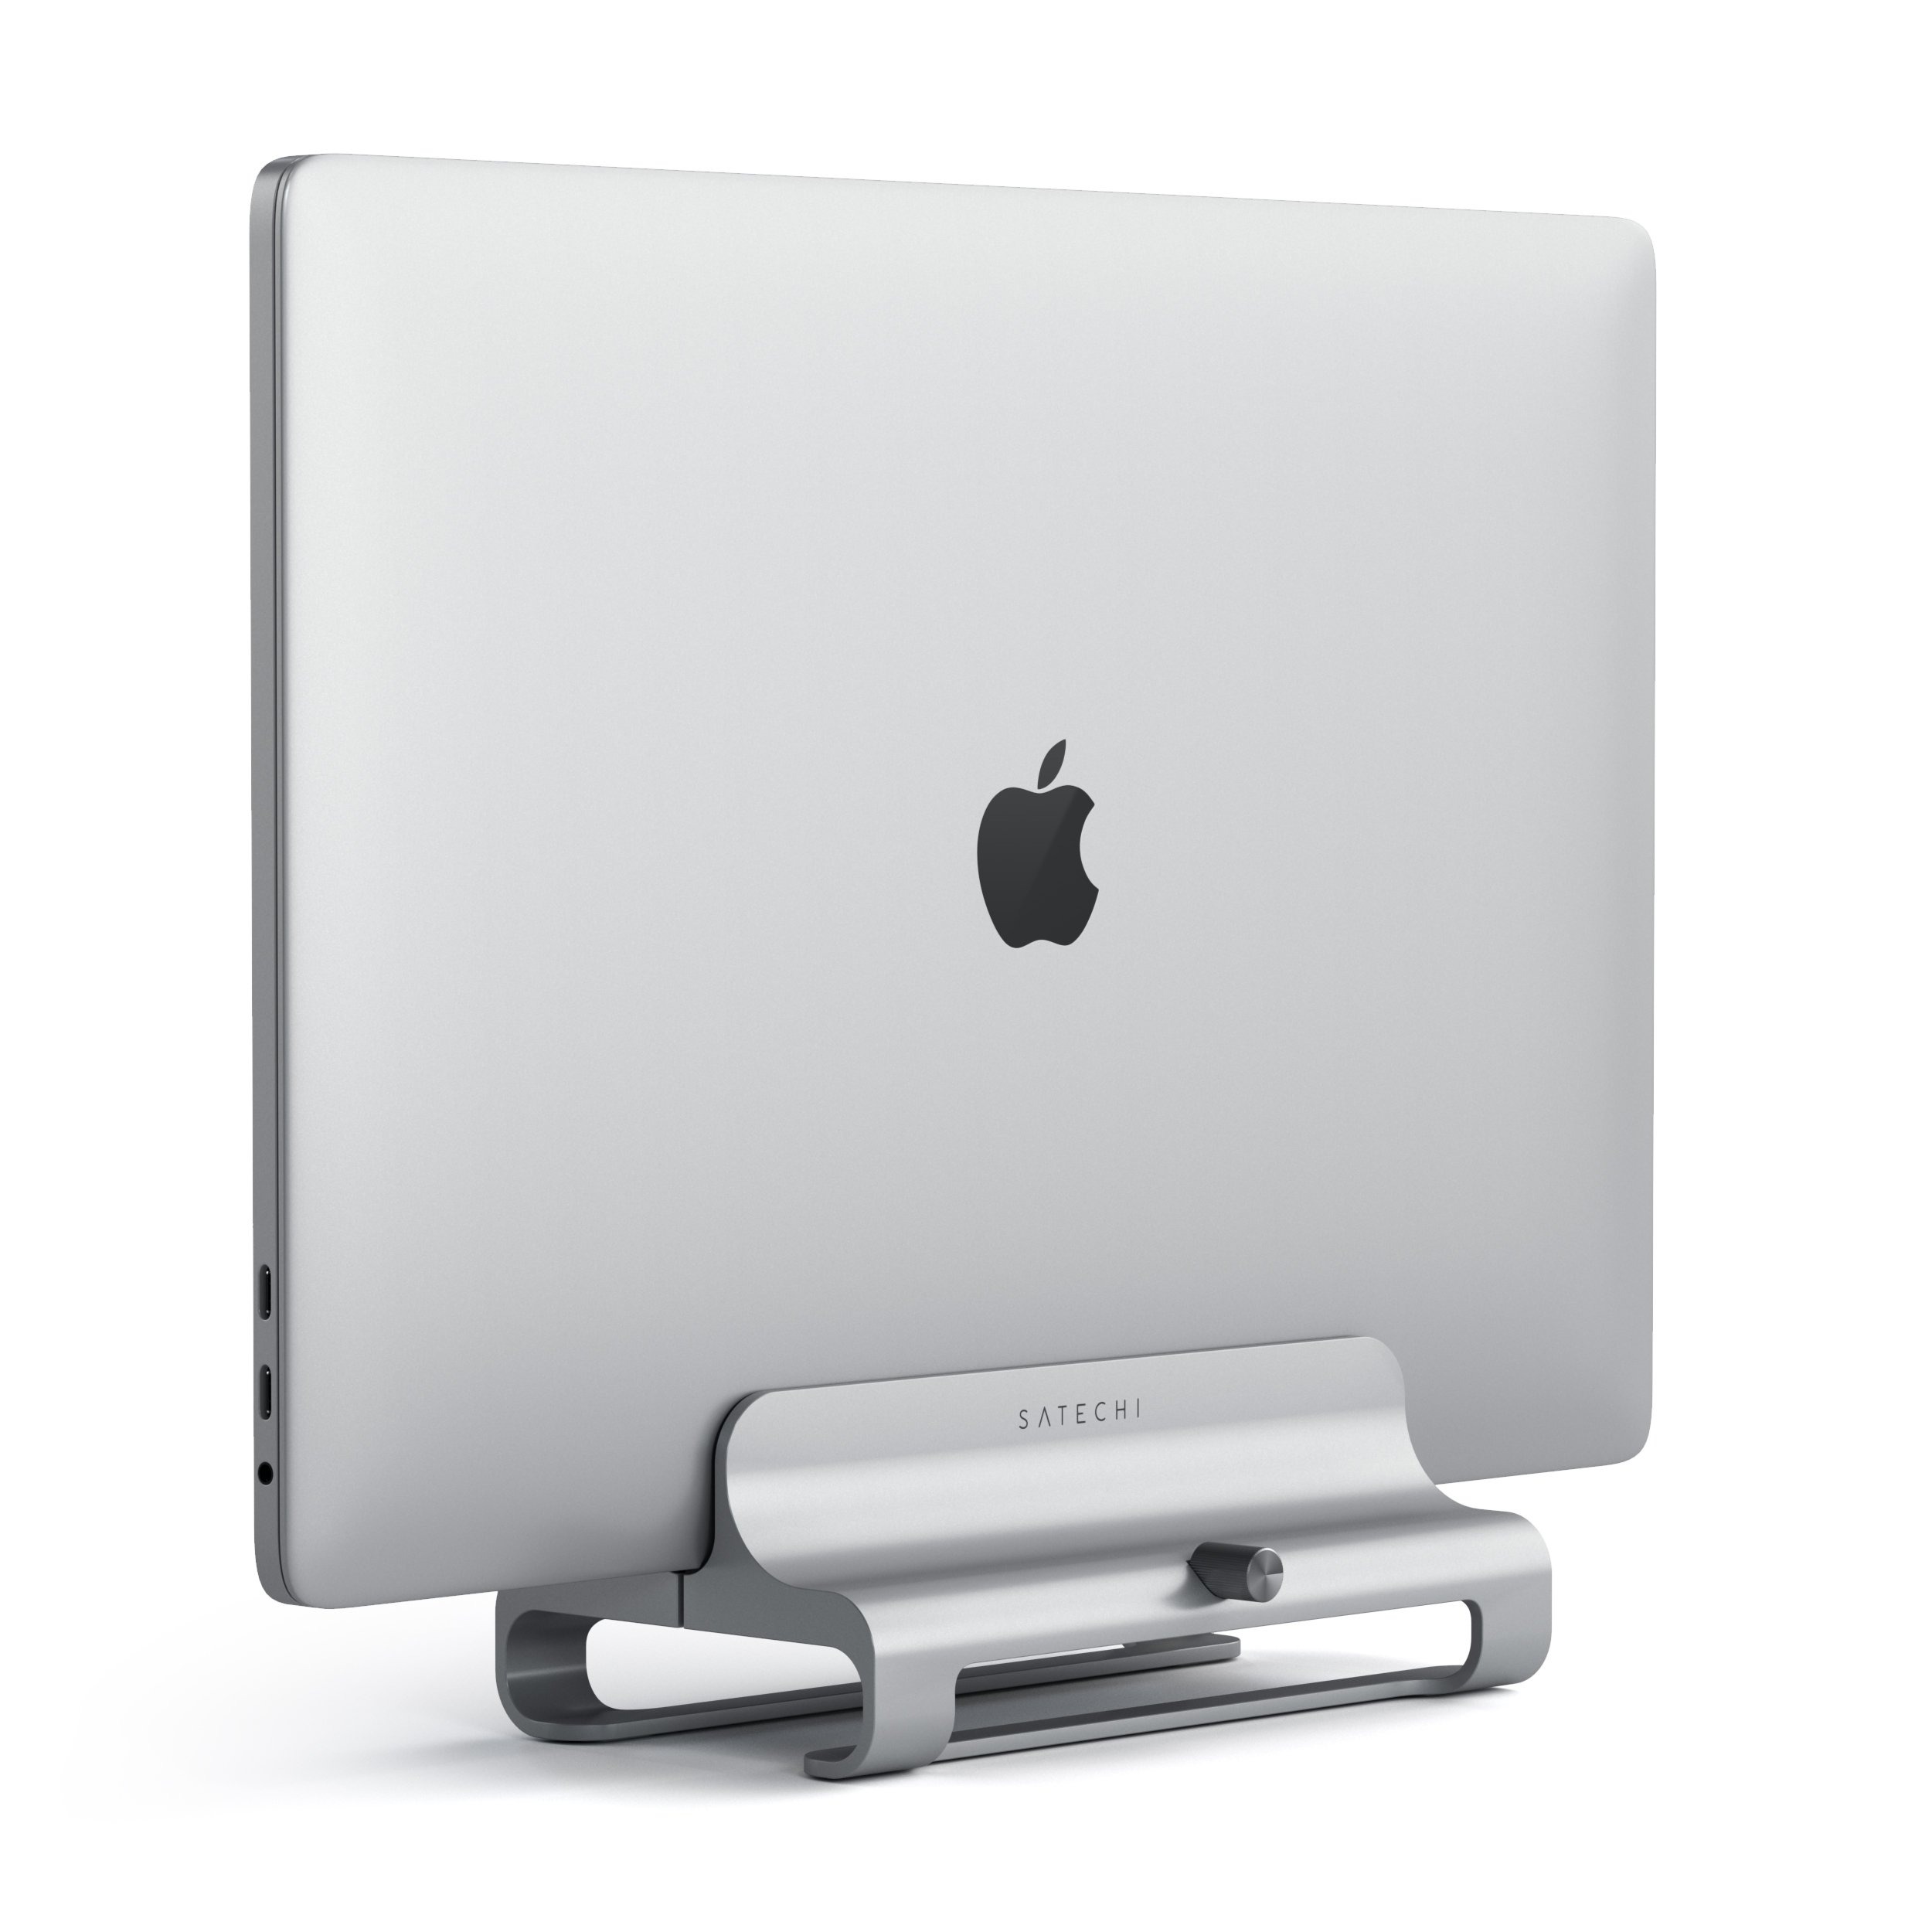 Satechi's New Desk Accessories In iMac Blue Are An Ideal Christmas Gift